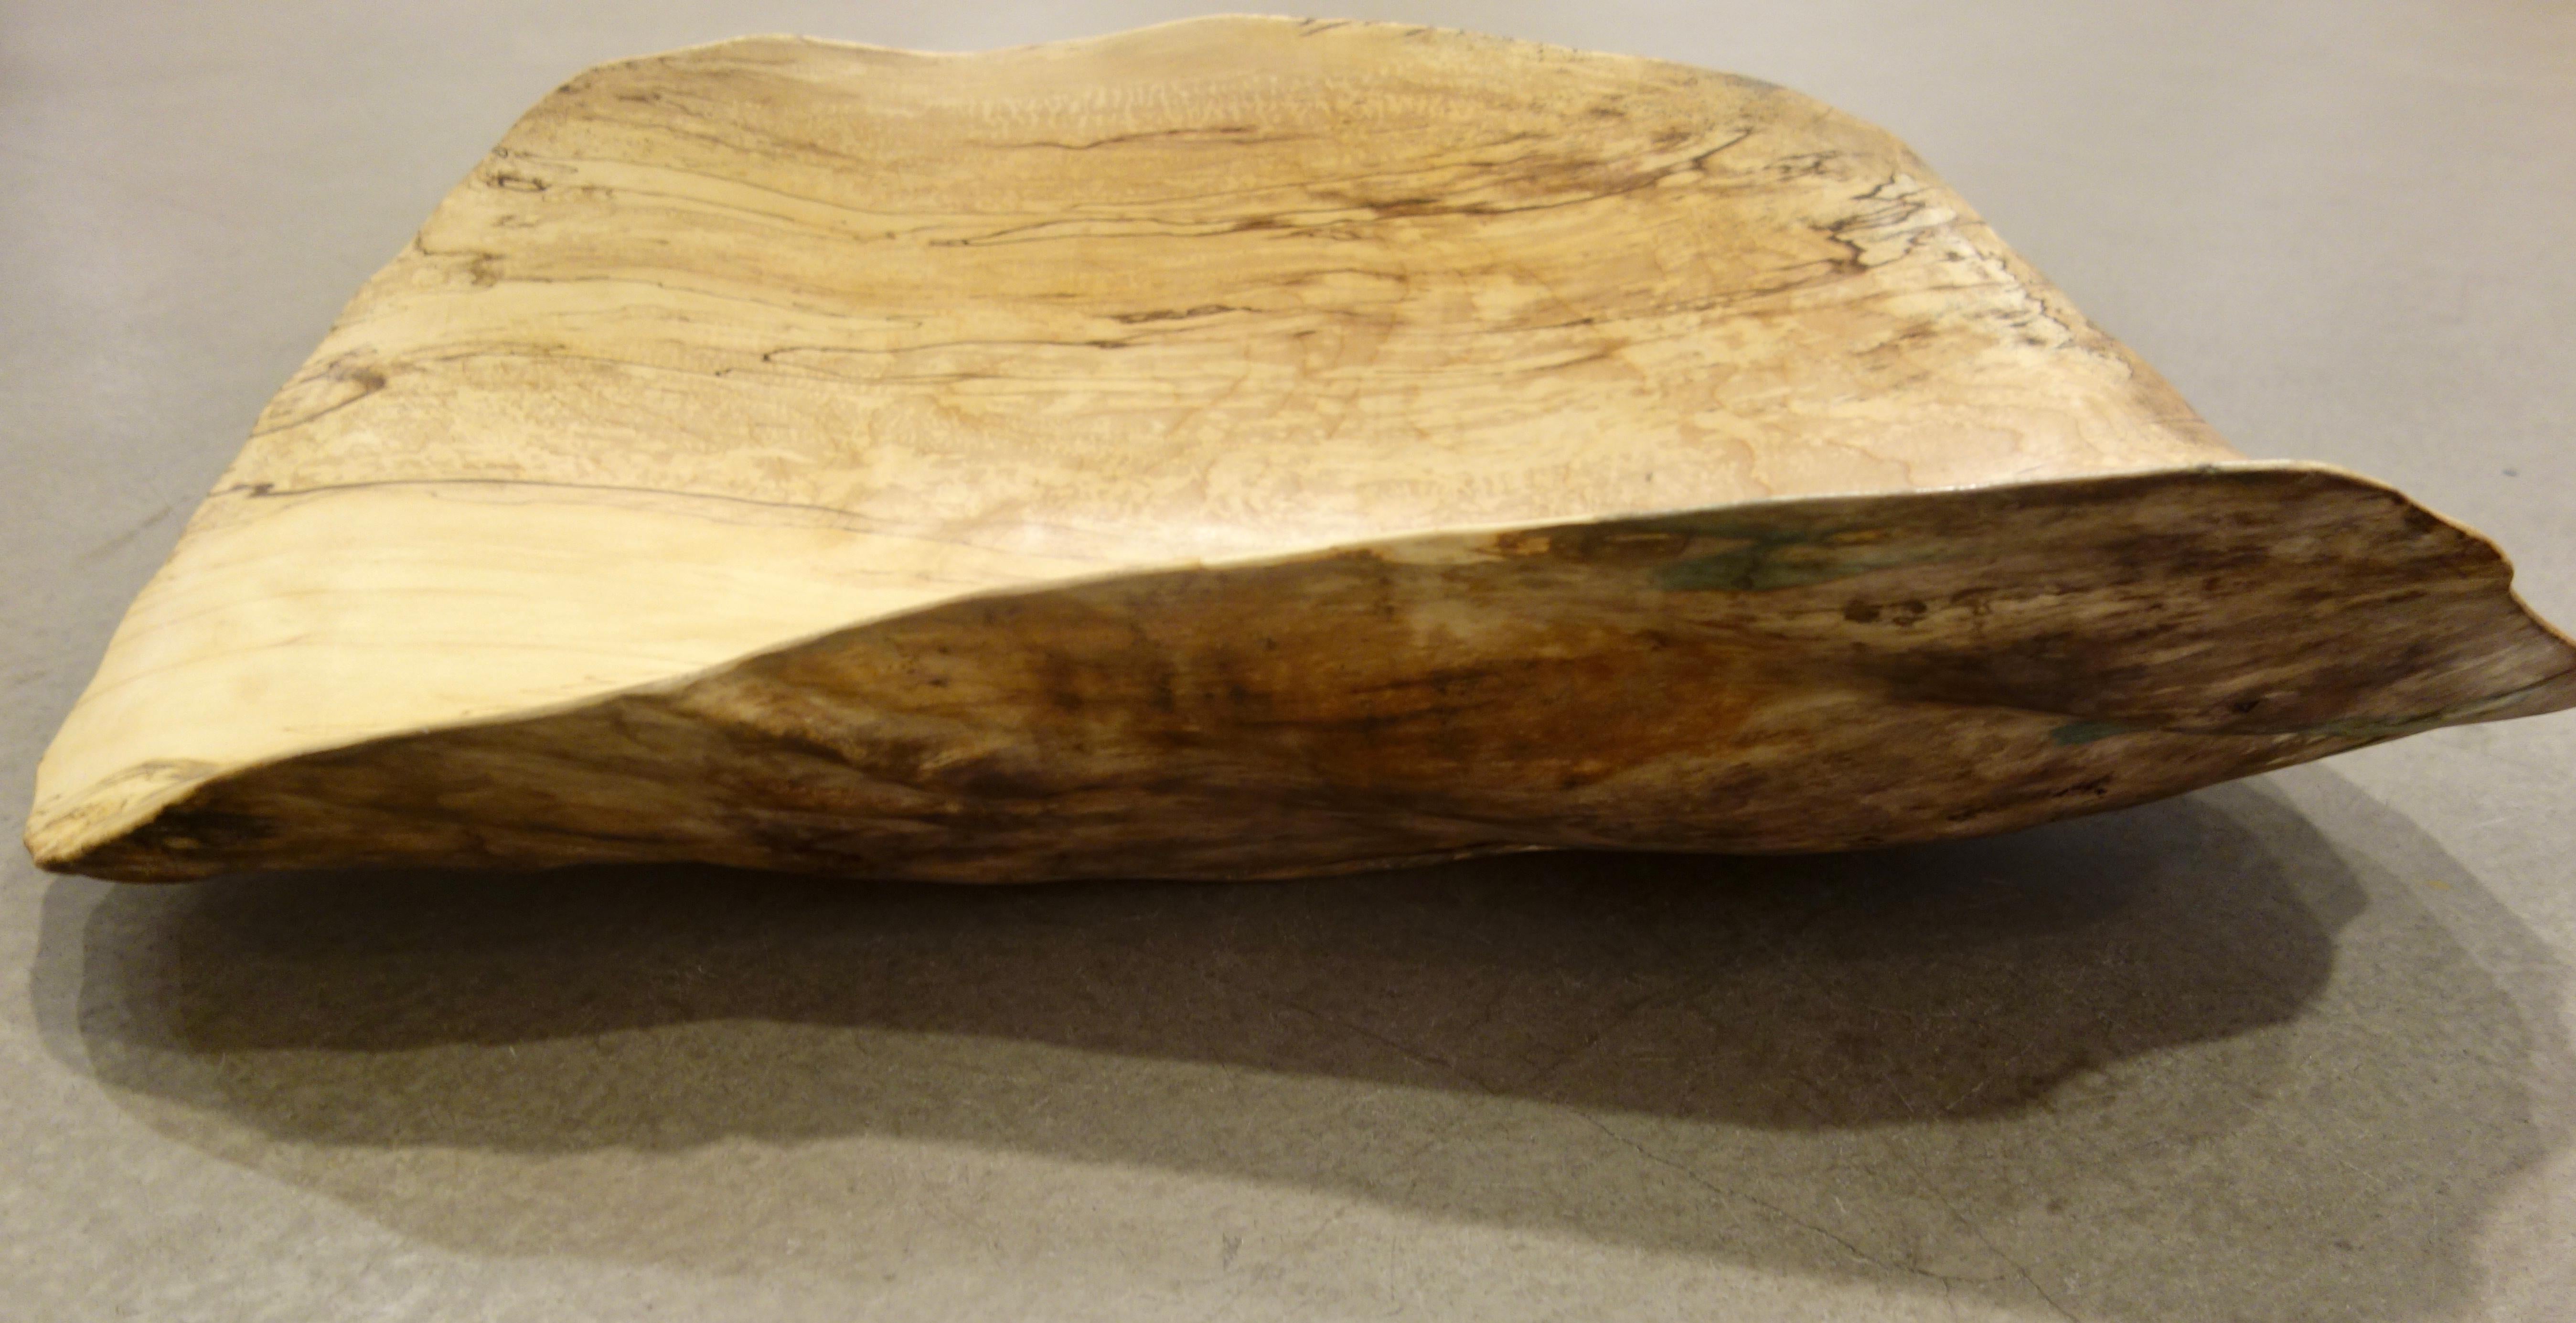 A hand-carved sugar burled maple 29 inch centre bowl or centerpiece buried in the ground for over a year to enhance the natural patina of the wood.